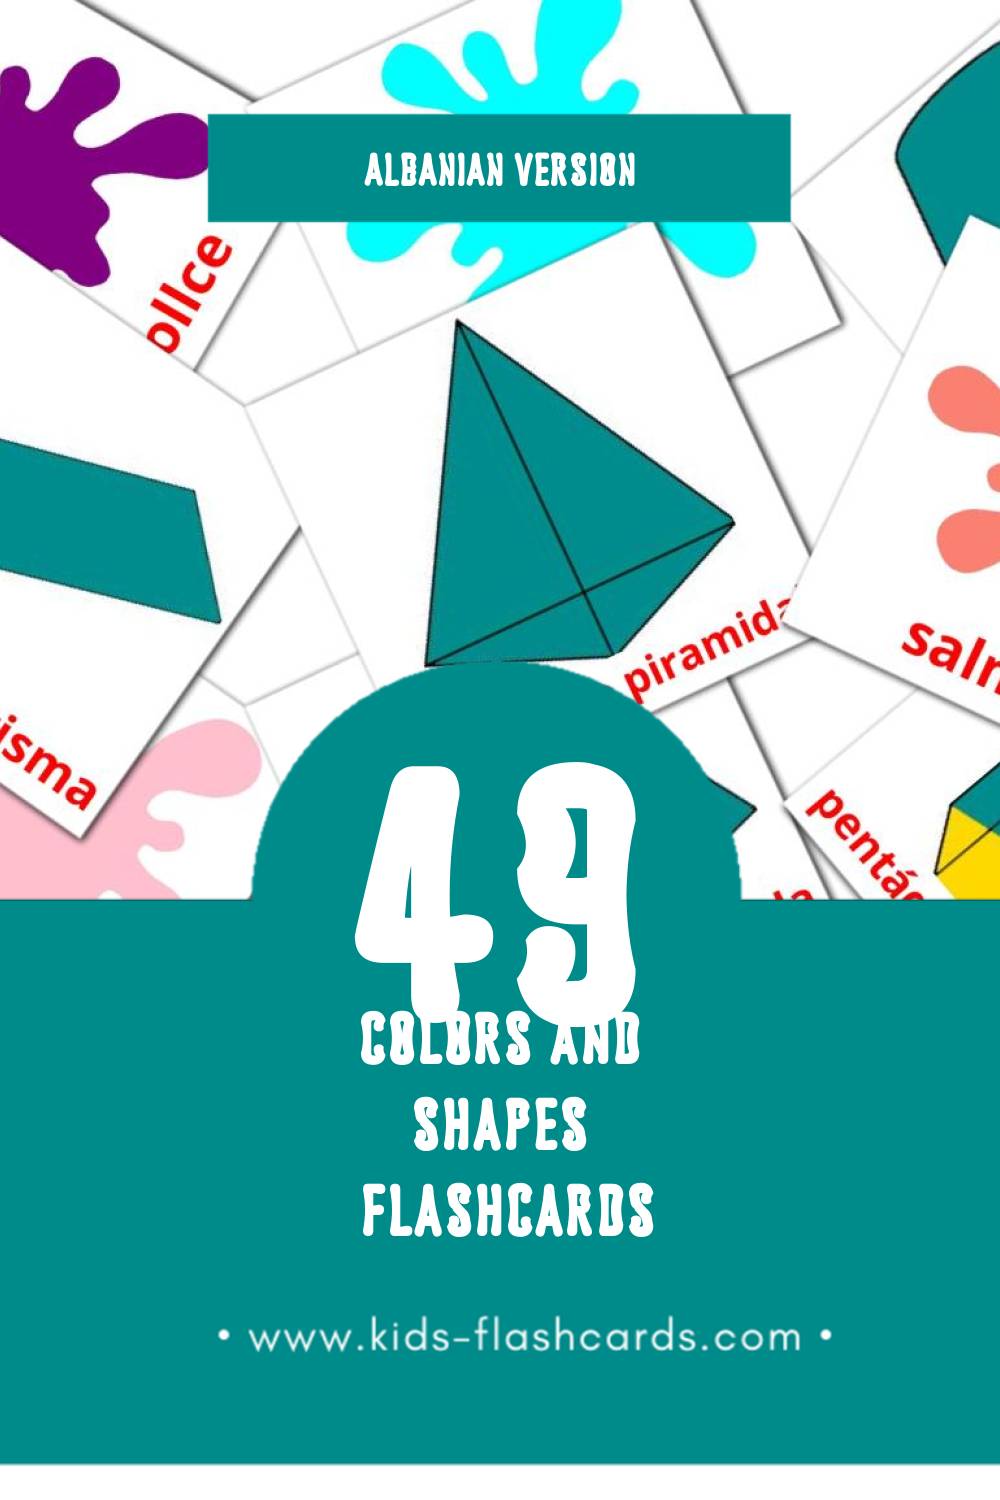 Visual 颜色和形状 Flashcards for Toddlers (32 cards in Albanian)